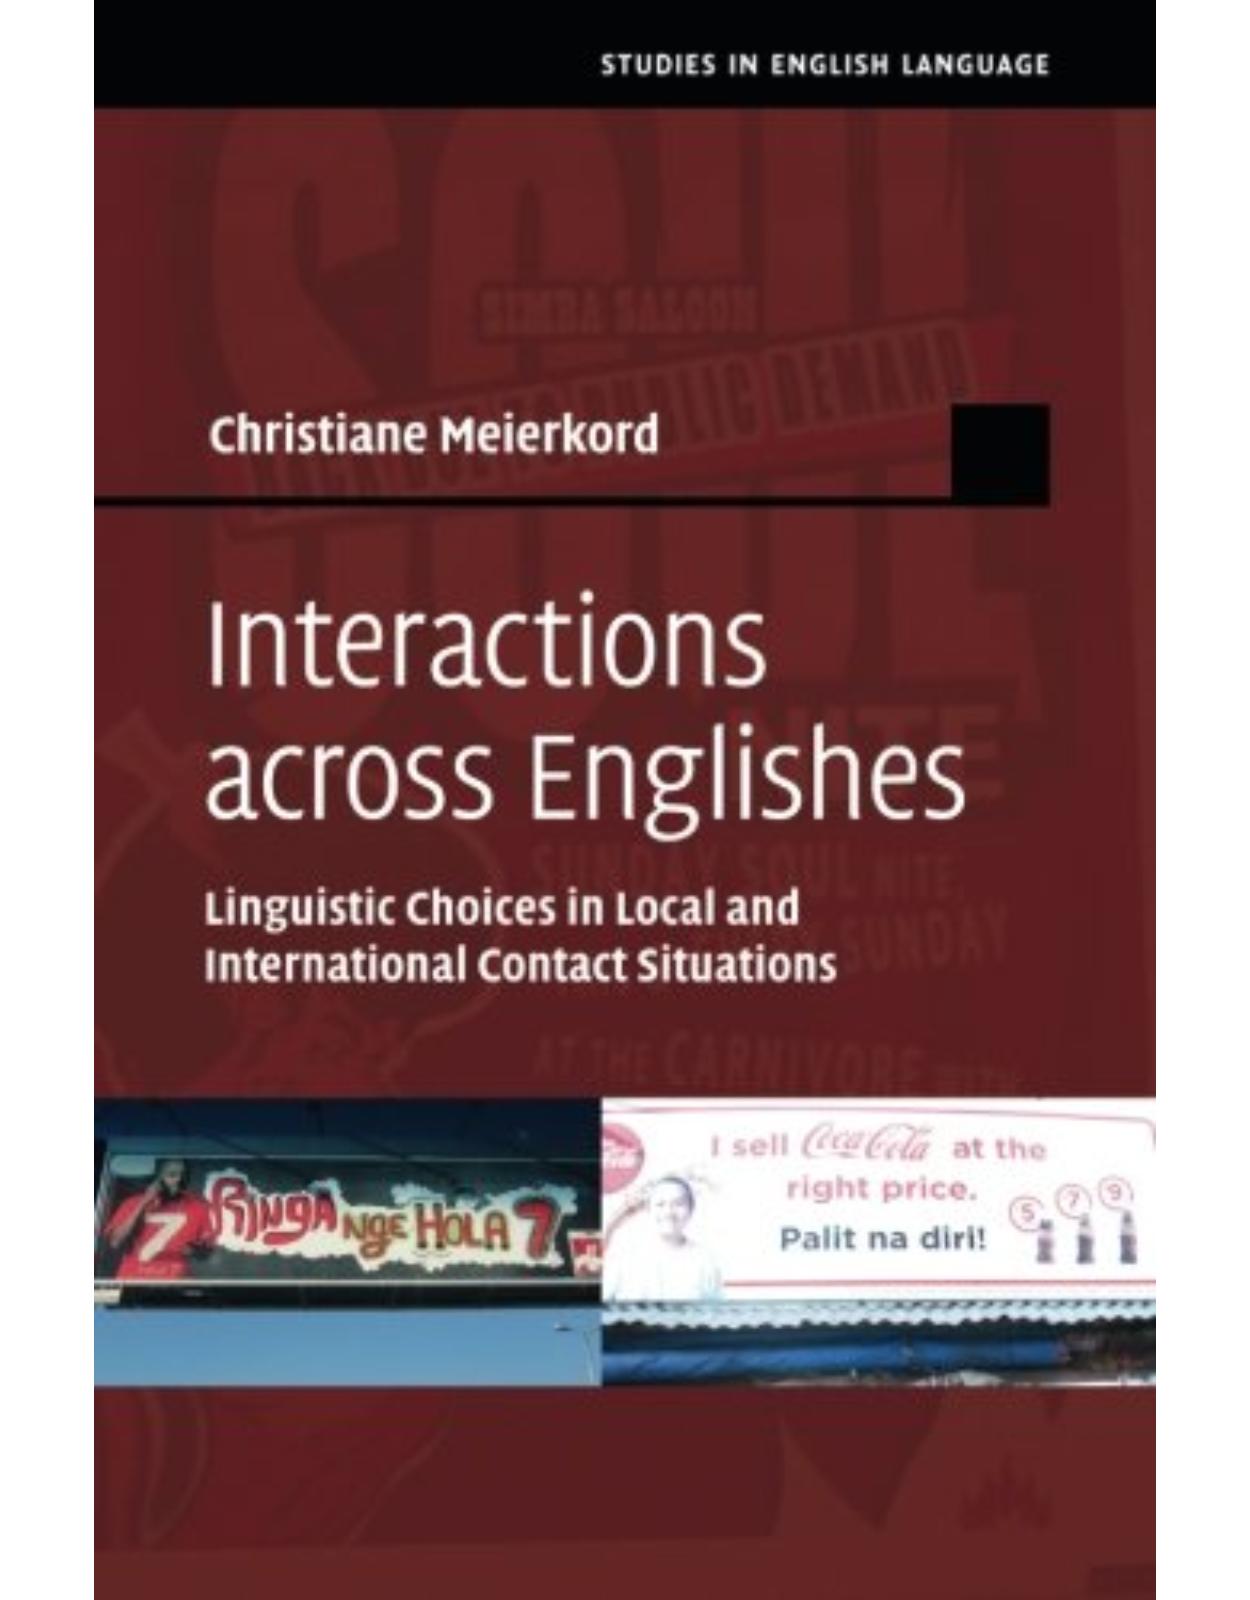 Interactions across Englishes: Linguistic Choices in Local and International Contact Situations (Studies in English Language)